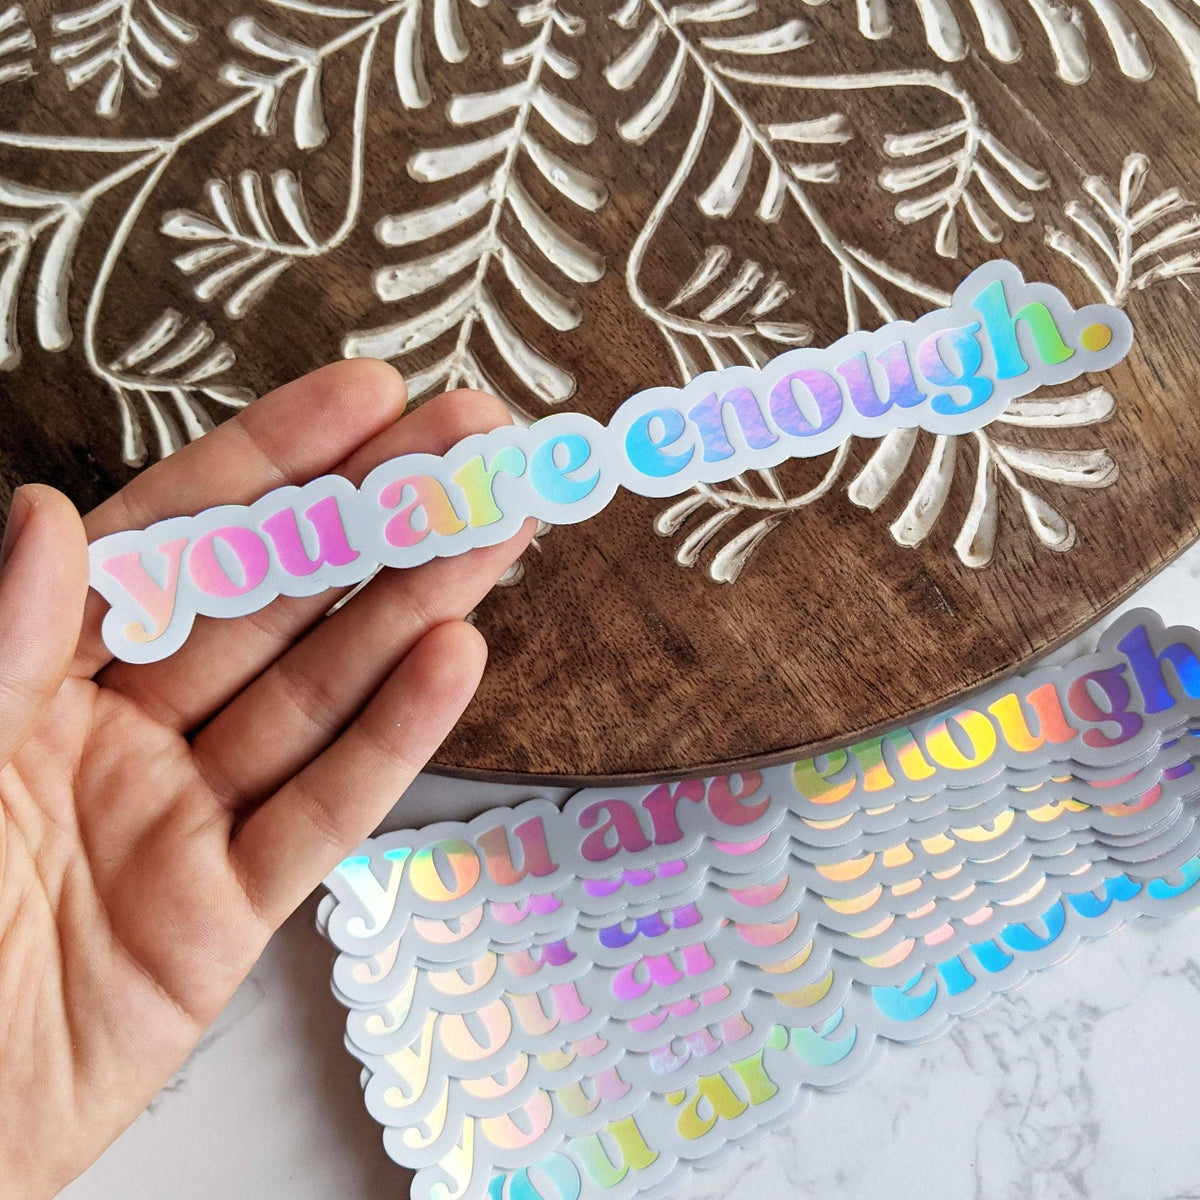 You are Enough Sticker for Mirror or Laptop Waterproof Vinyl You are Enough Holographic Sticker, Self-Love Affirmation Sticker